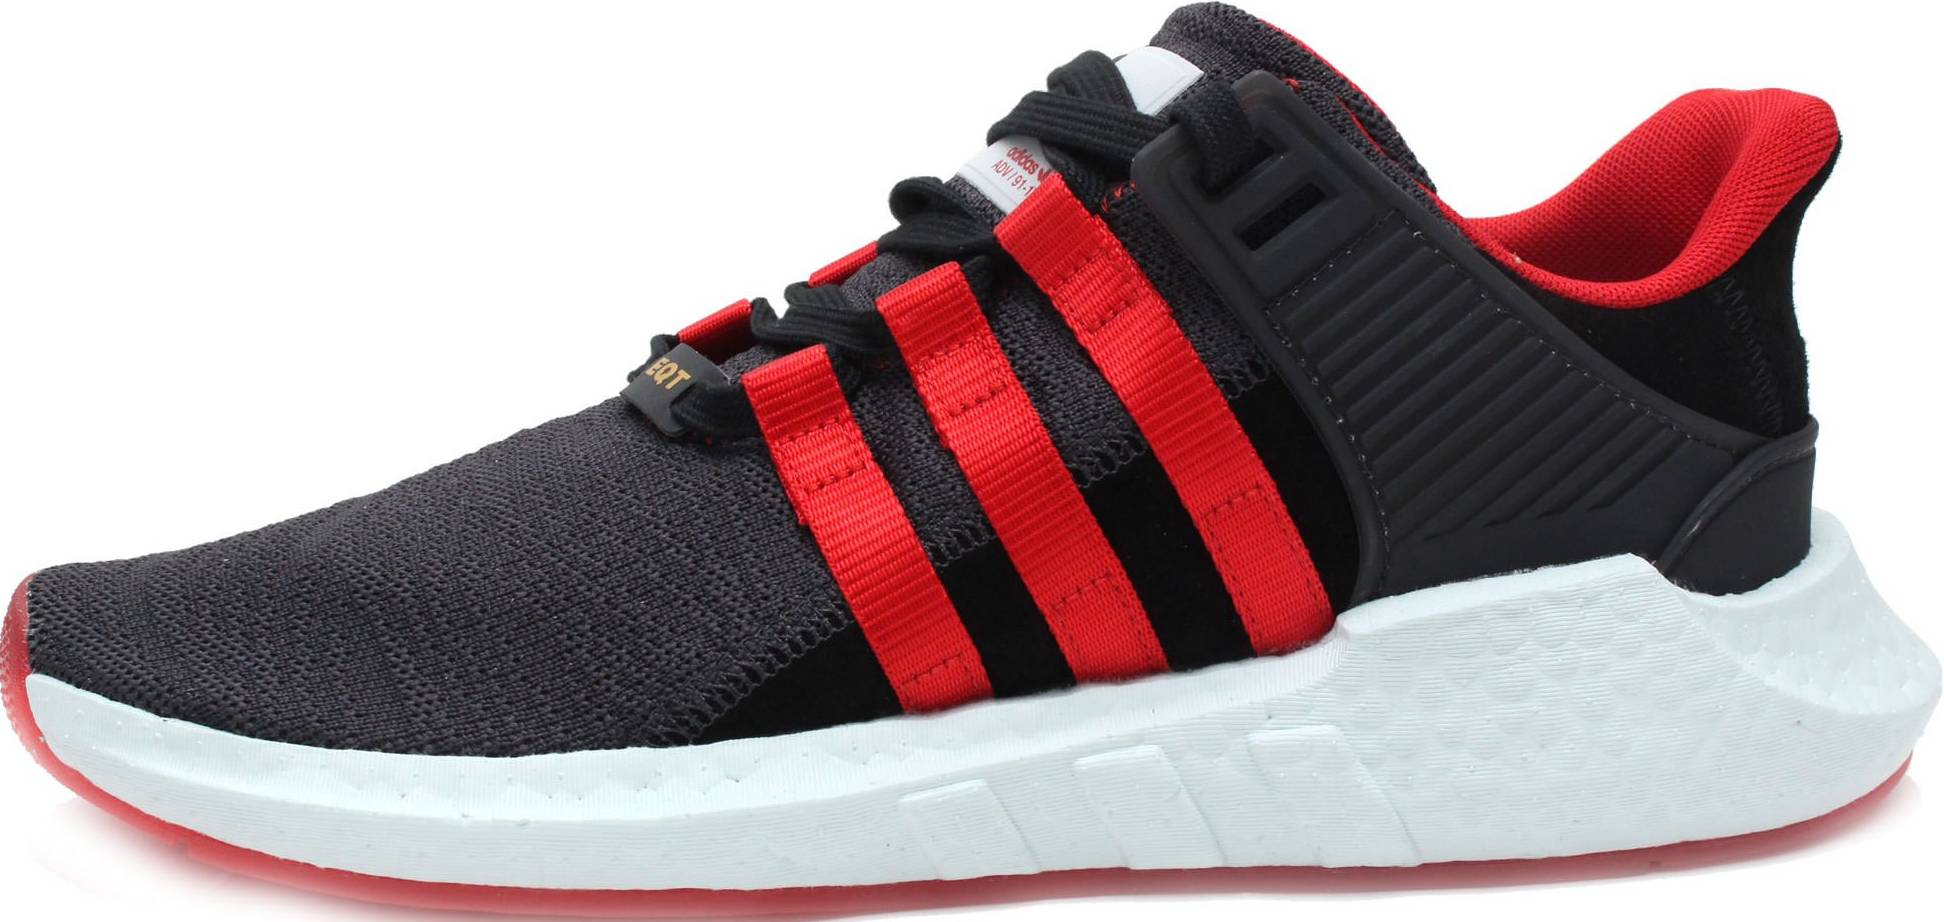 Only $90 + Review of Adidas EQT Support 93/17 Yuanxiao | RunRepeat